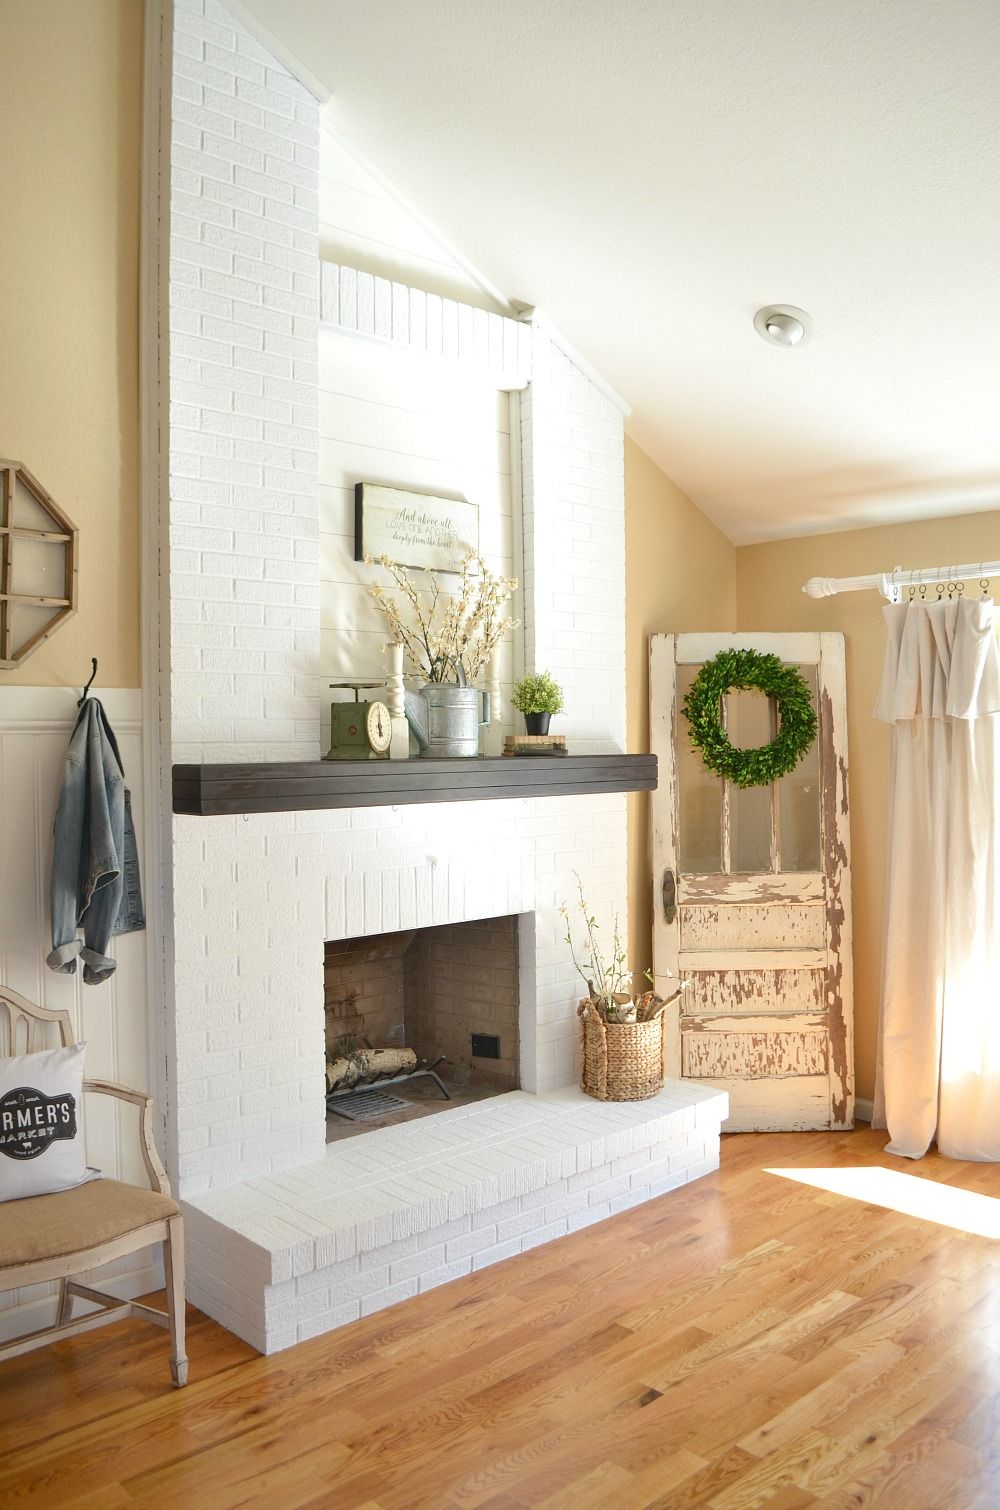 Update Brick Fireplace Elegant How to Paint A Brick Fireplace Fireplaces